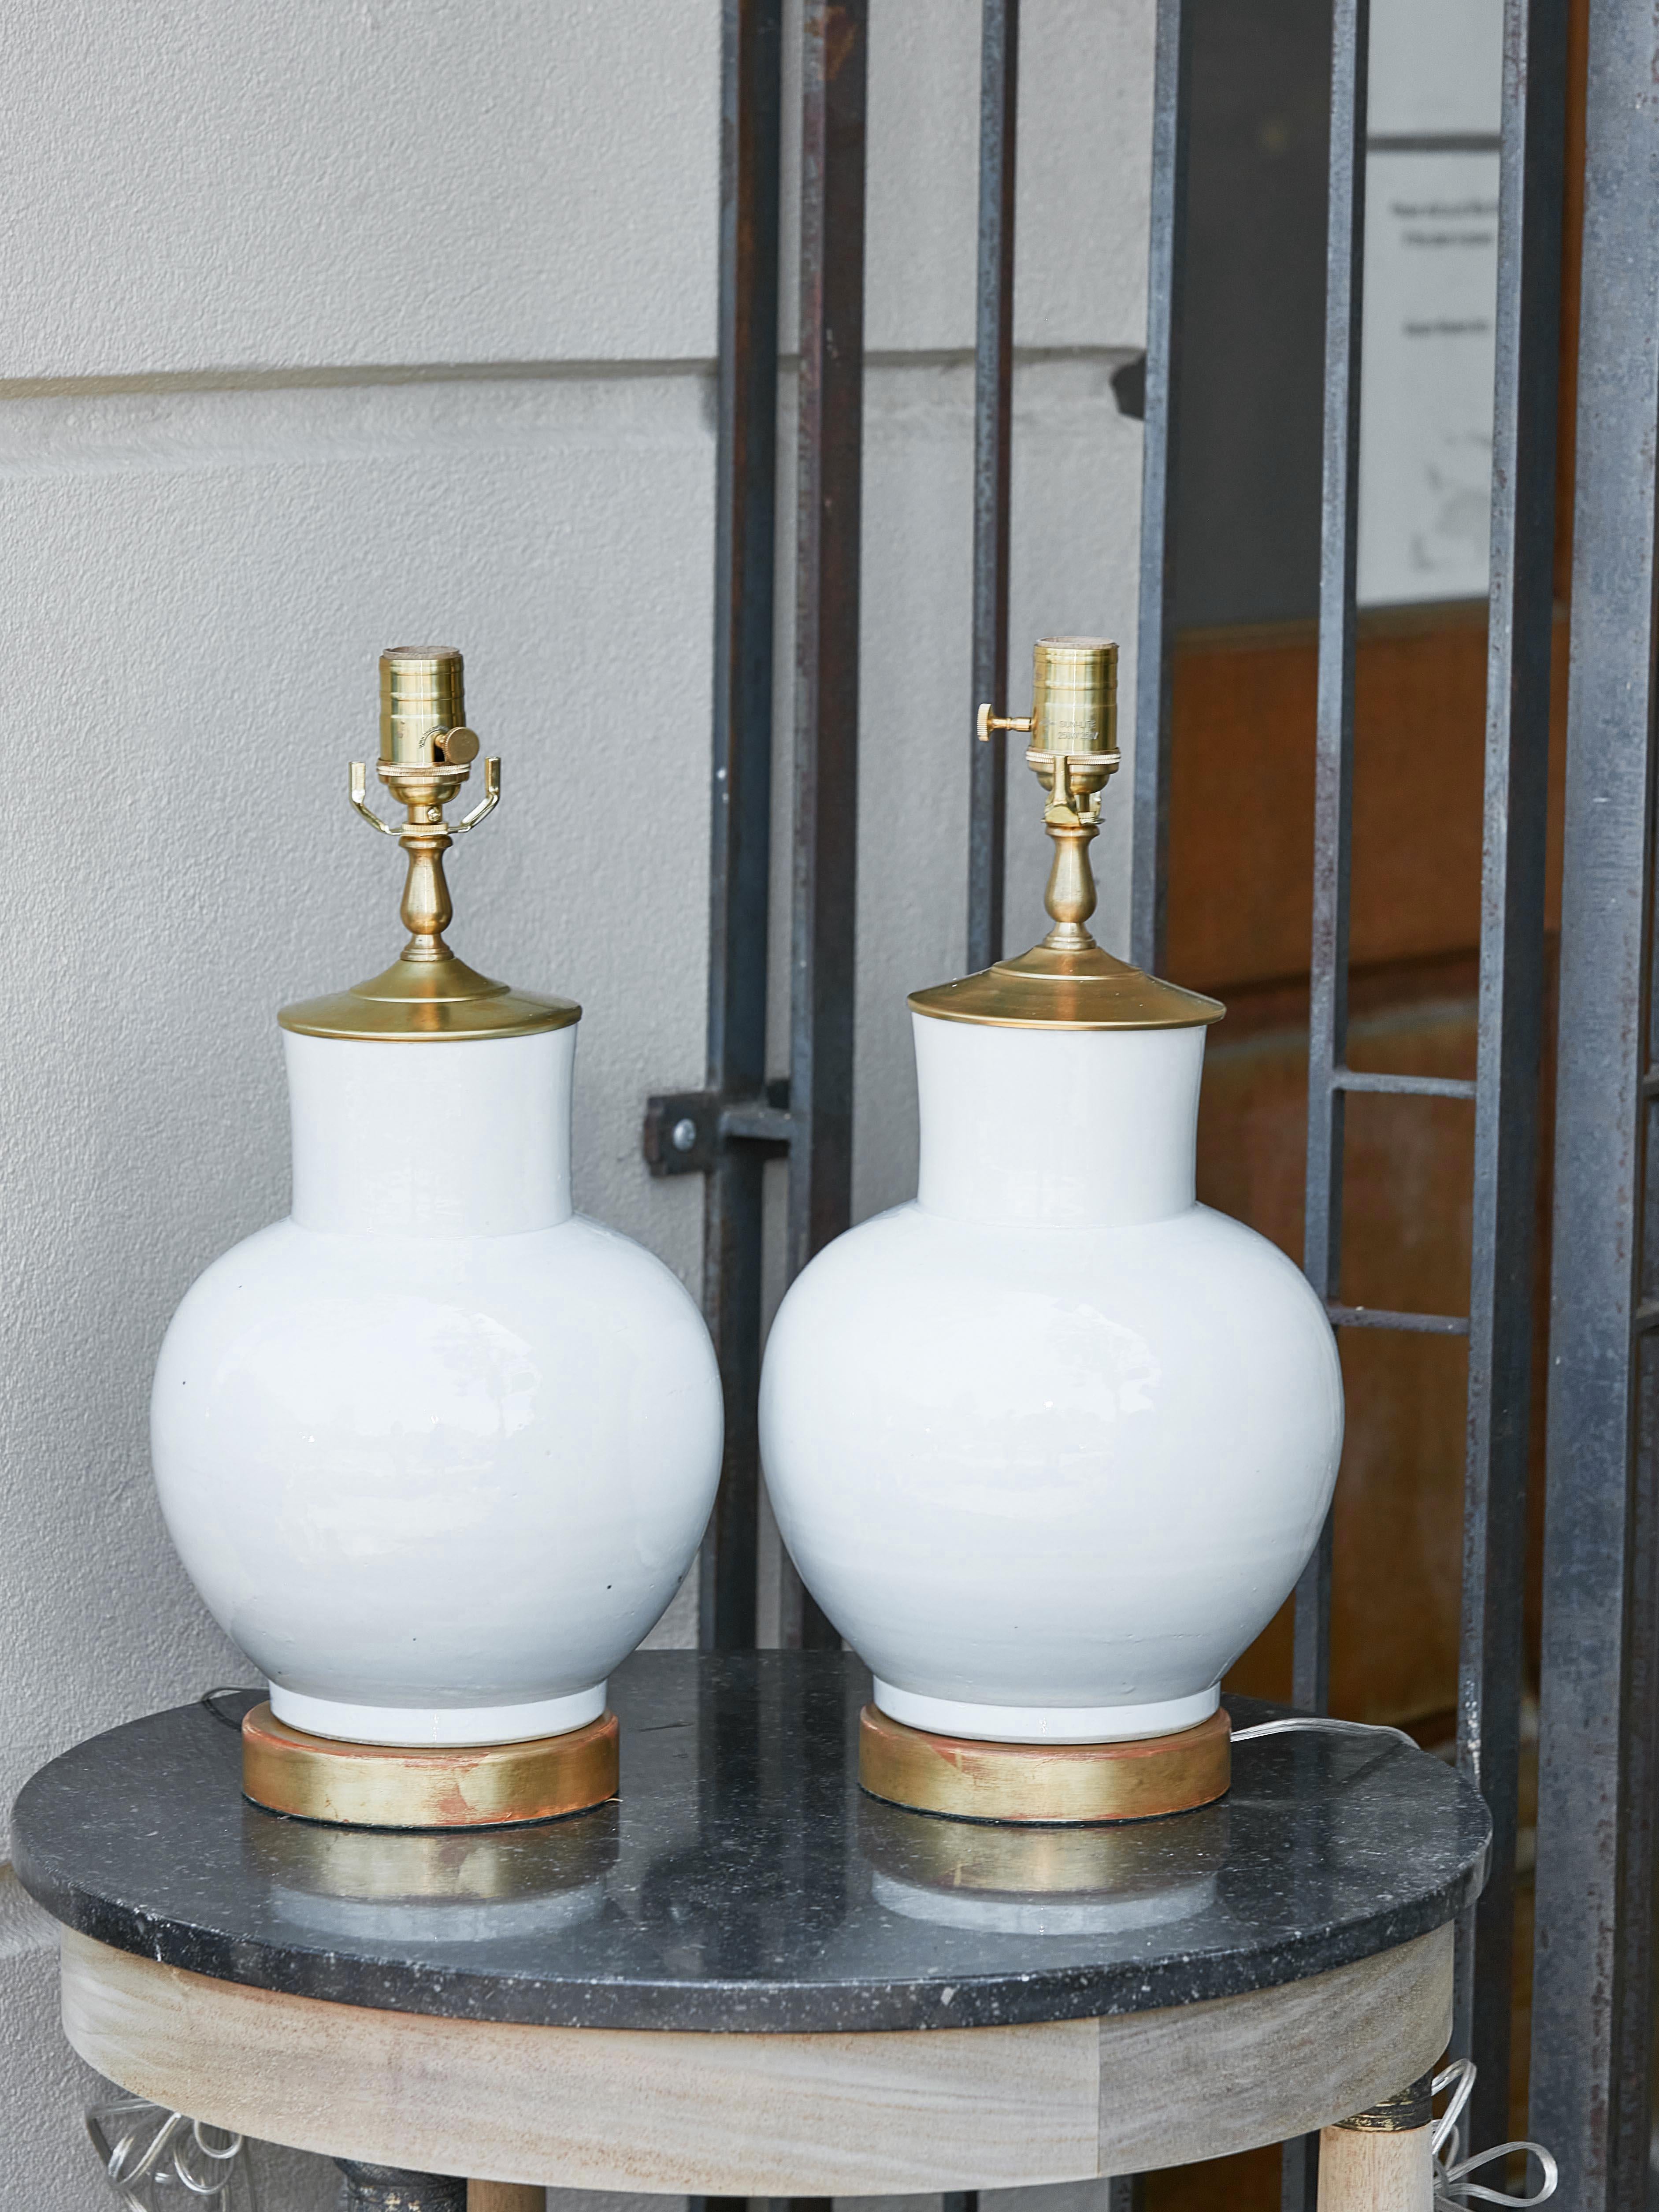 A pair of Asian white porcelain table lamps from the 21st century with brass single lights and circular giltwood bases. Drench your living space in an aura of sophistication and understated elegance with this exquisite pair of Asian white porcelain